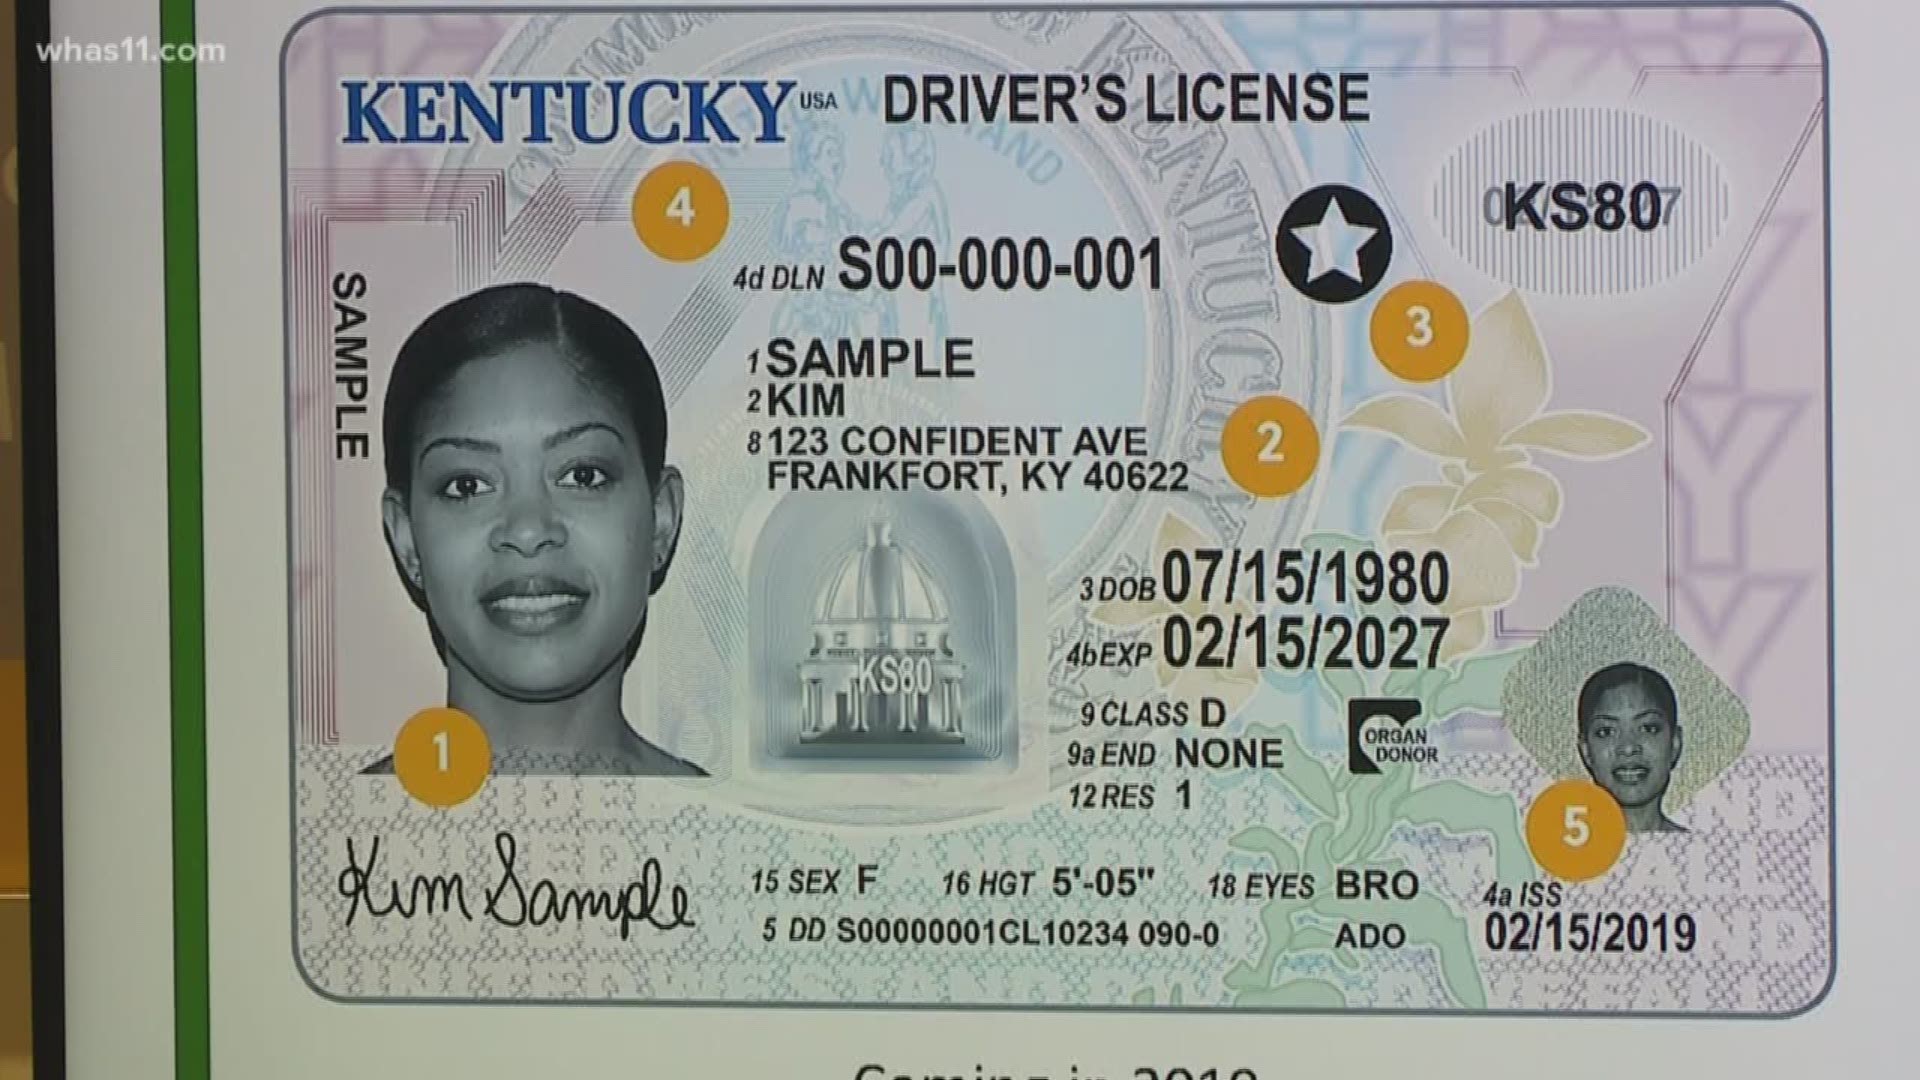 It's our first look at Kentucky's new driver's license expected to roll out at in 2019.